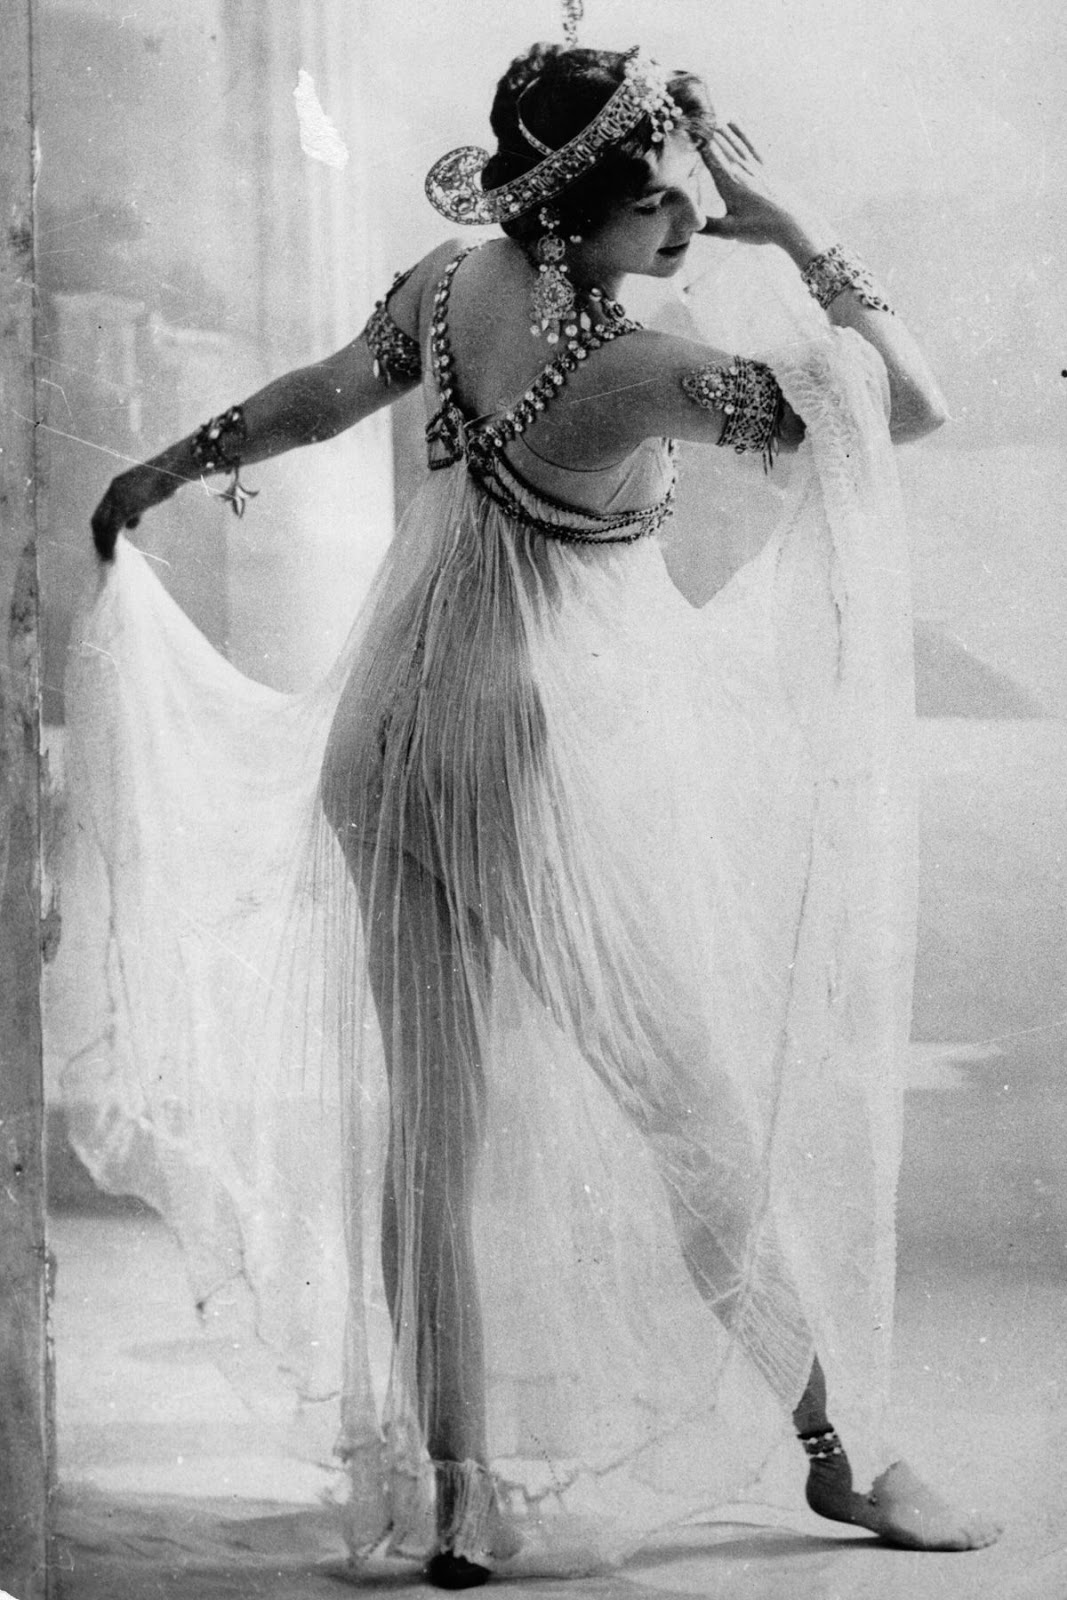 Mournful Fate of Mata Hari, and 14 Stunning Photos of This Dutch Exotic